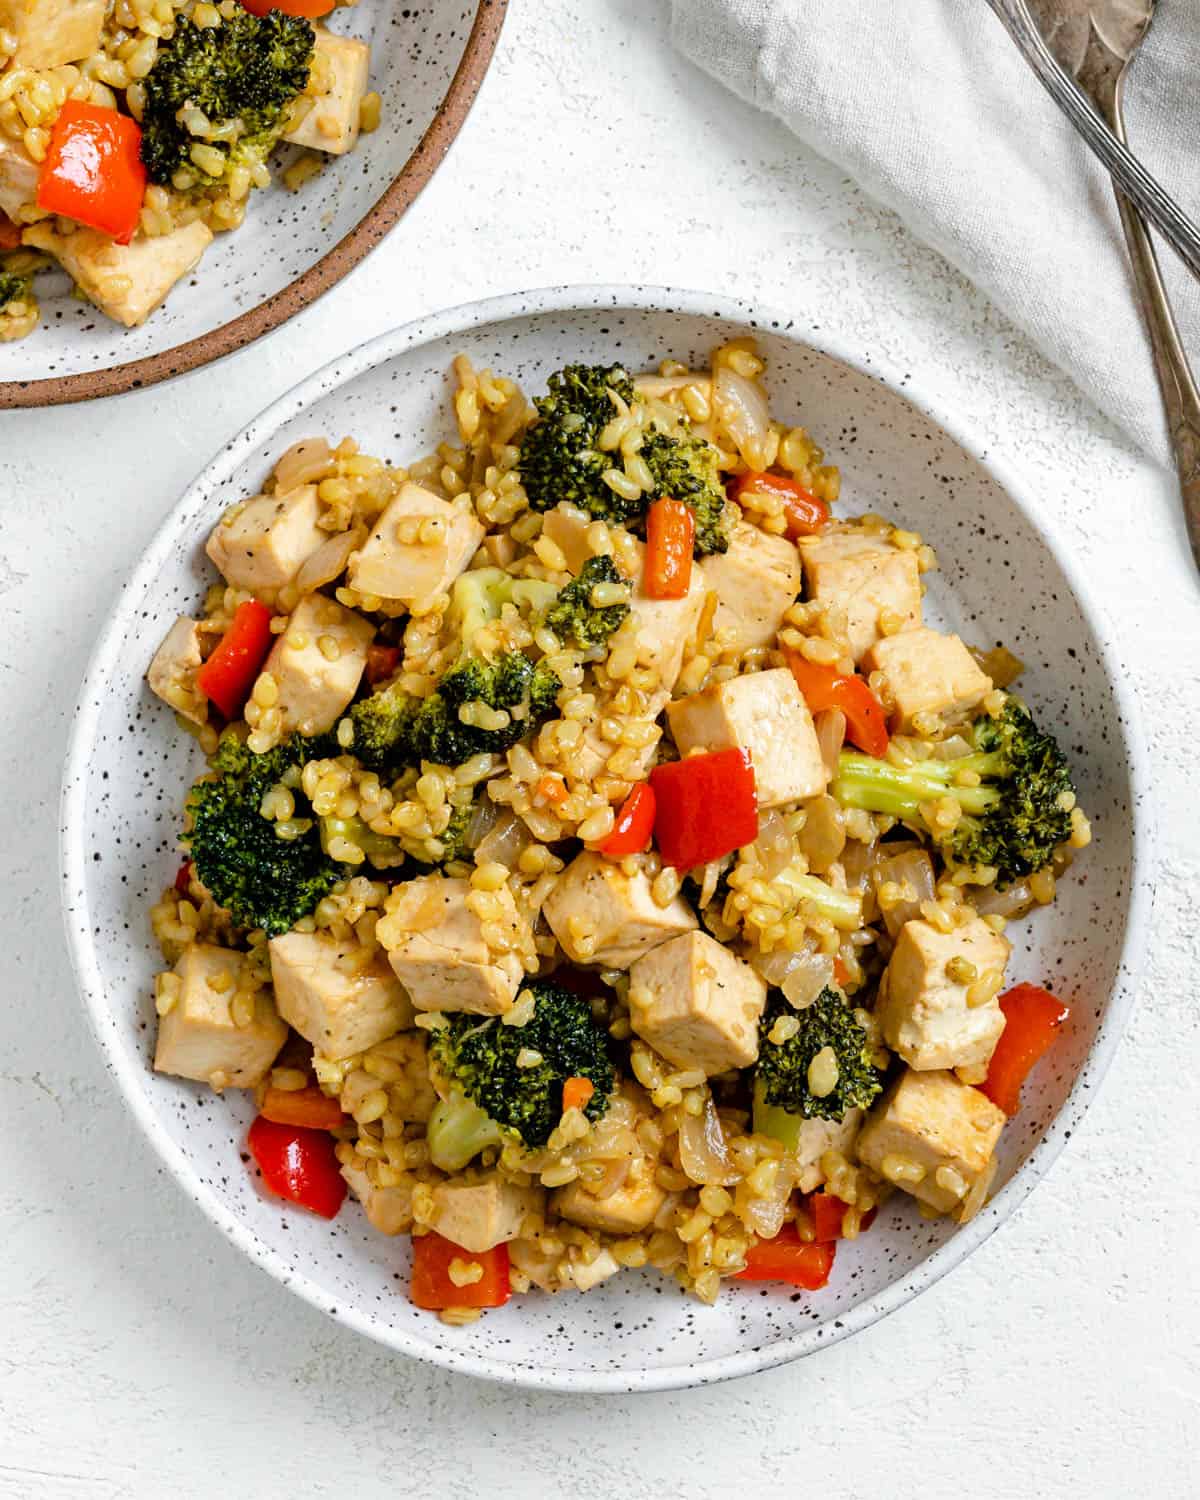 completed Veggie Brown Rice Stir Fry  in a bowl against a white background